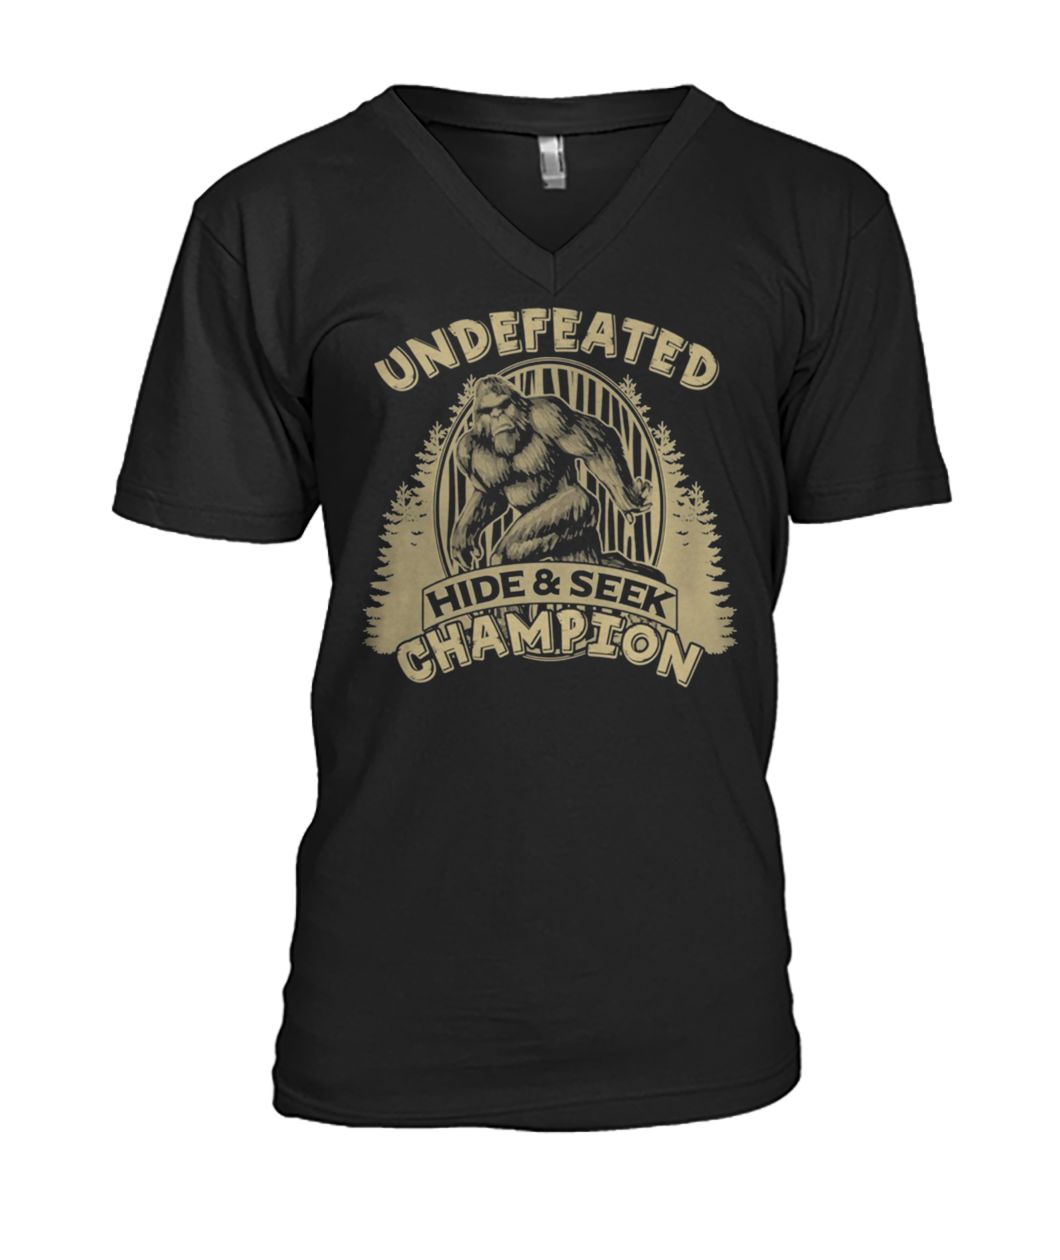 Bigfoot undefeated hide and seek champion mens v-neck